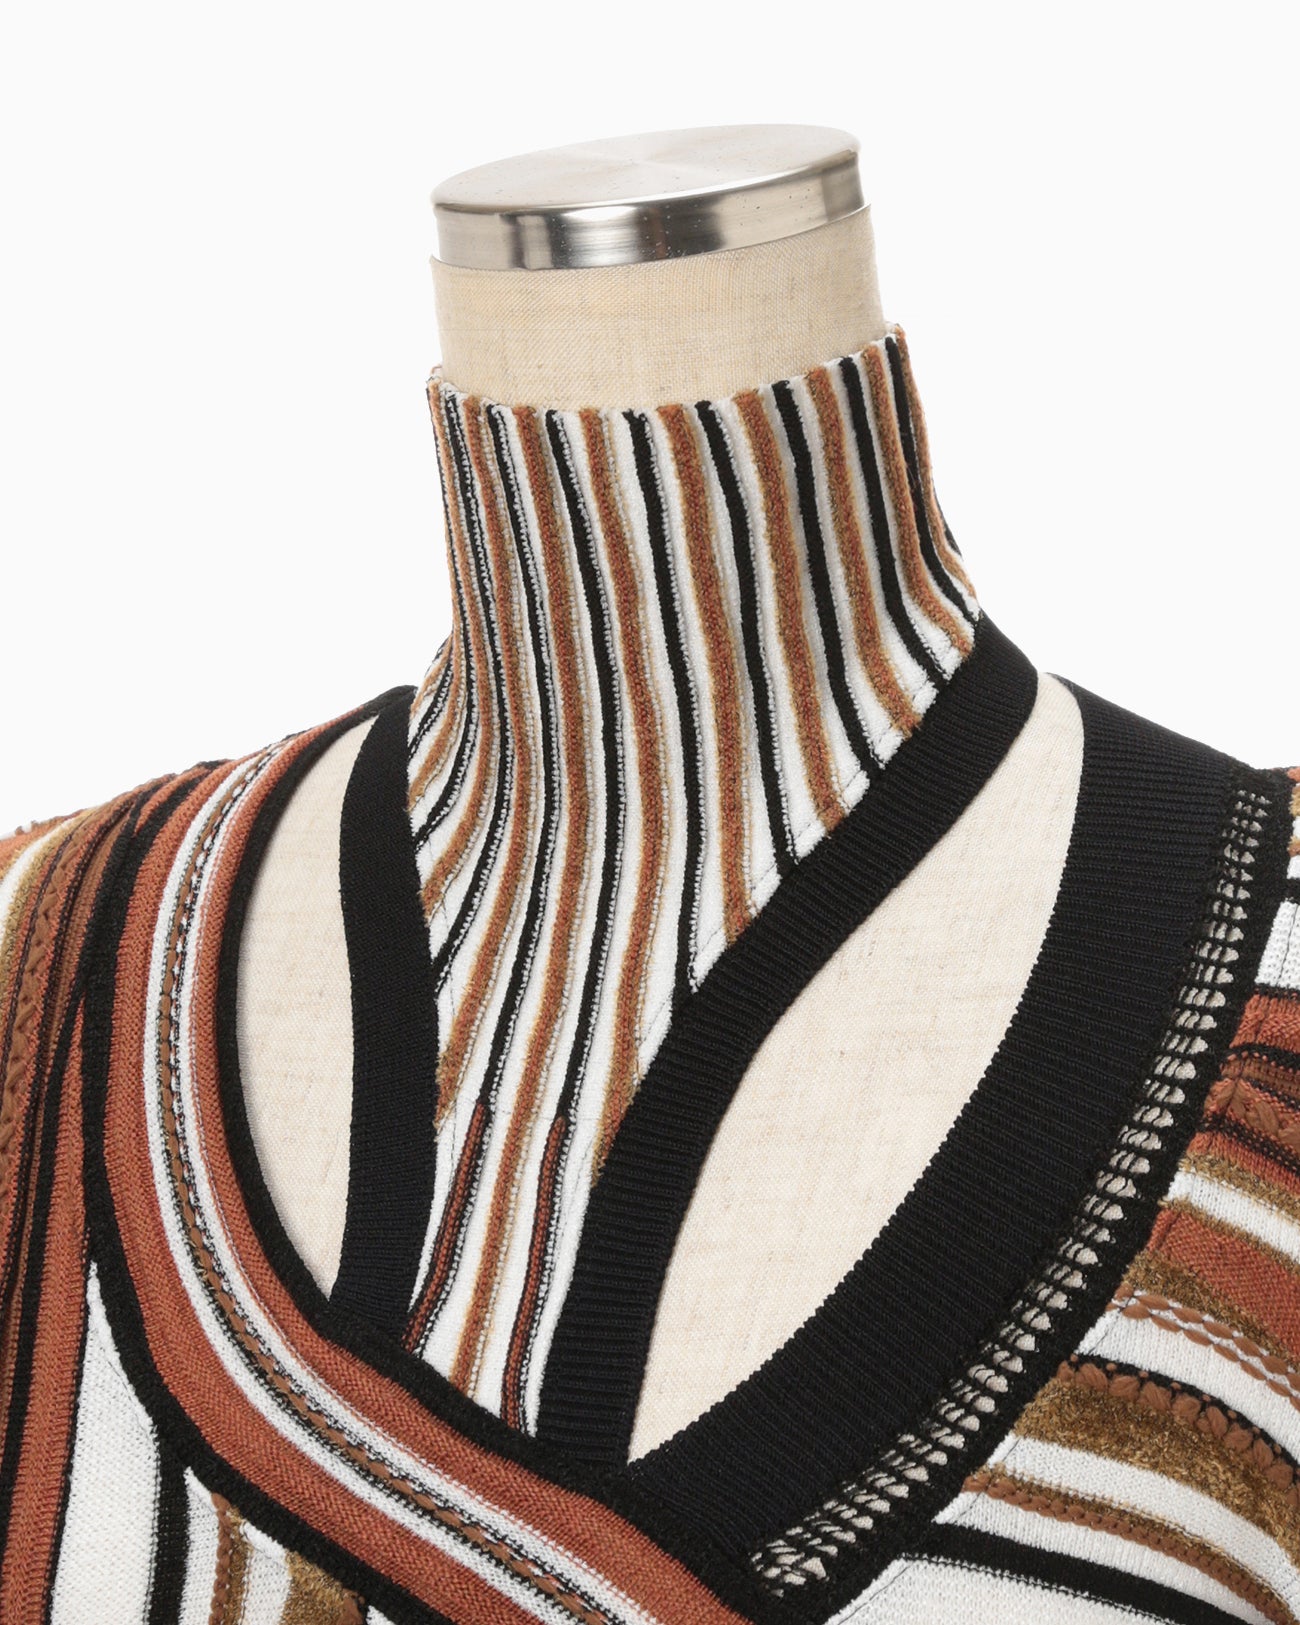 Stripe Jacquard High Neck Knitted Top - brown